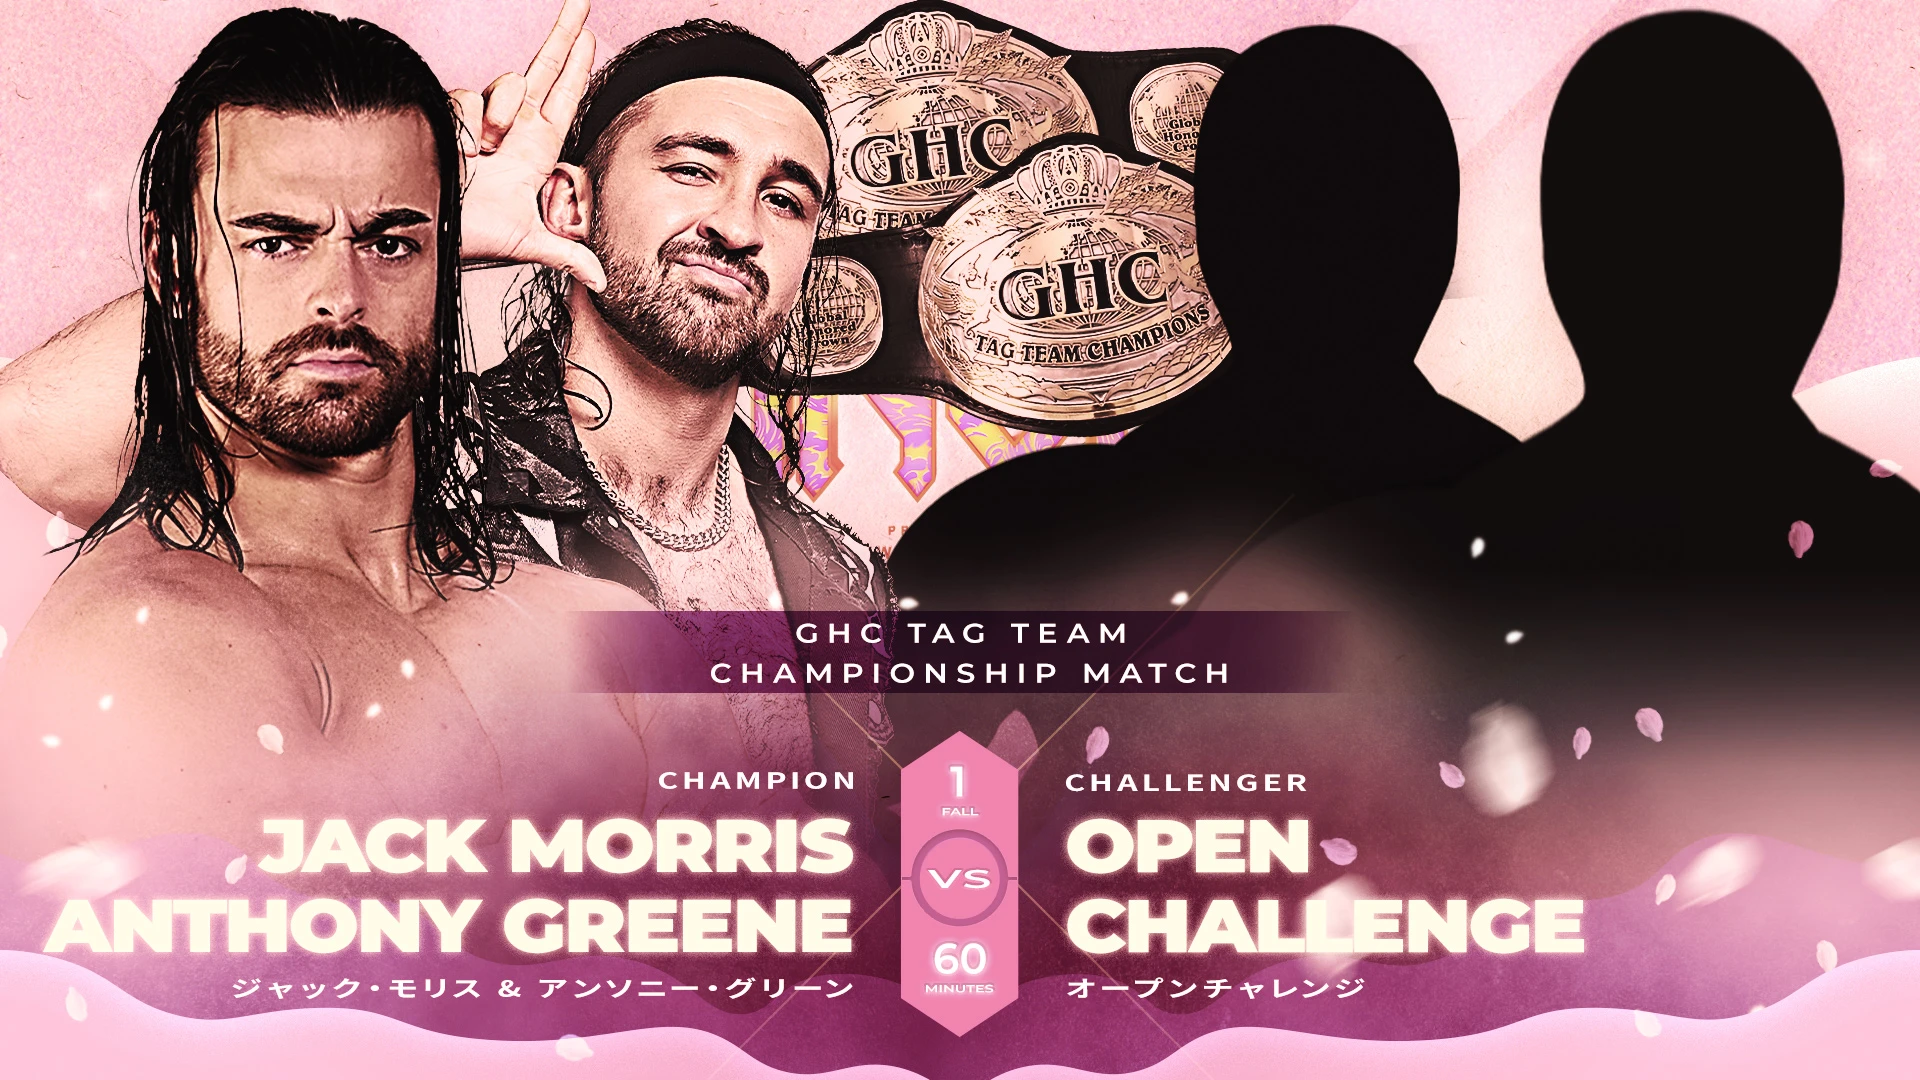 GHC Heavyweight Tag Team Champions Jack Morris & Anthony Greene Issue Open Challenge To Any Tag Team In The World